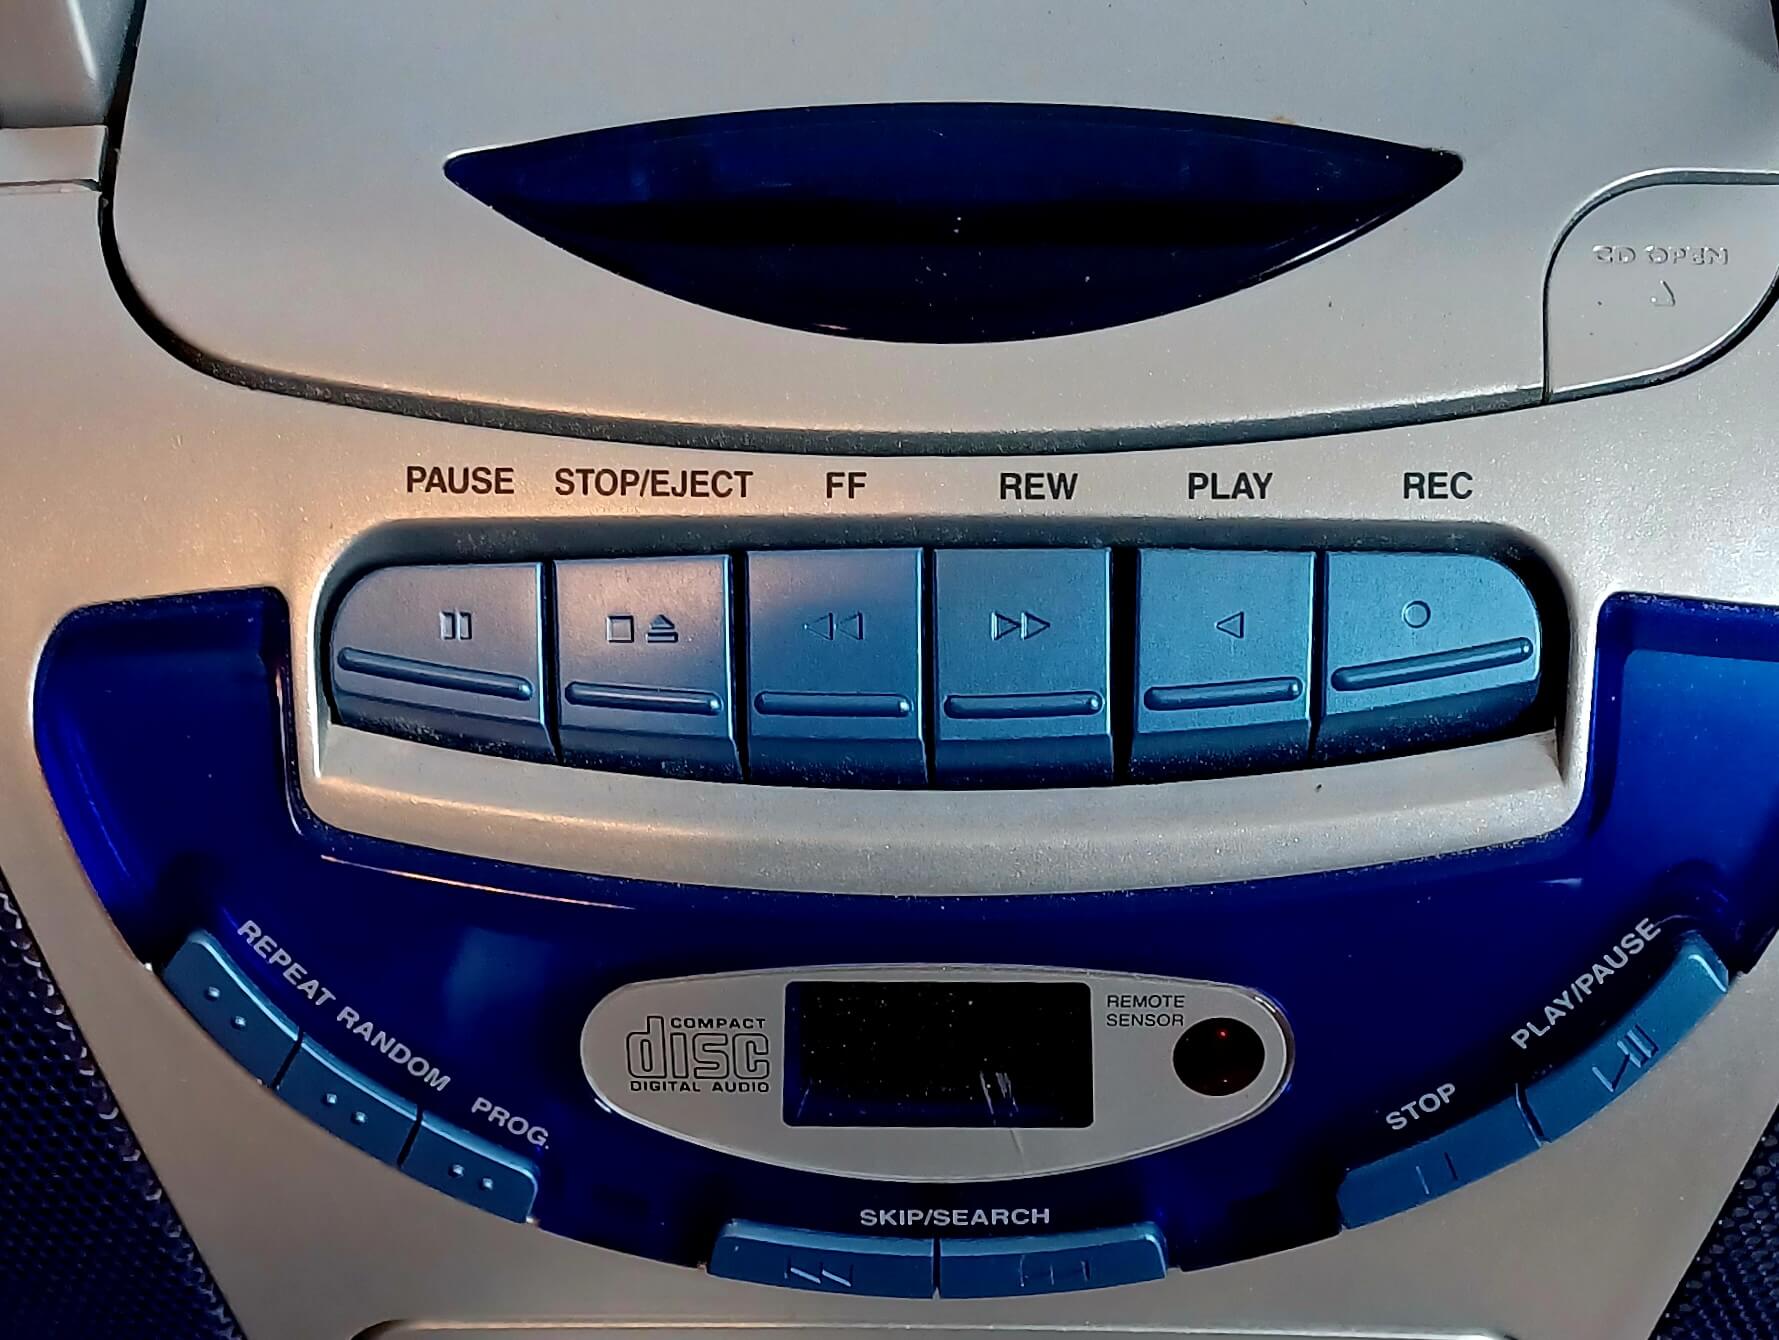 CD player buttons